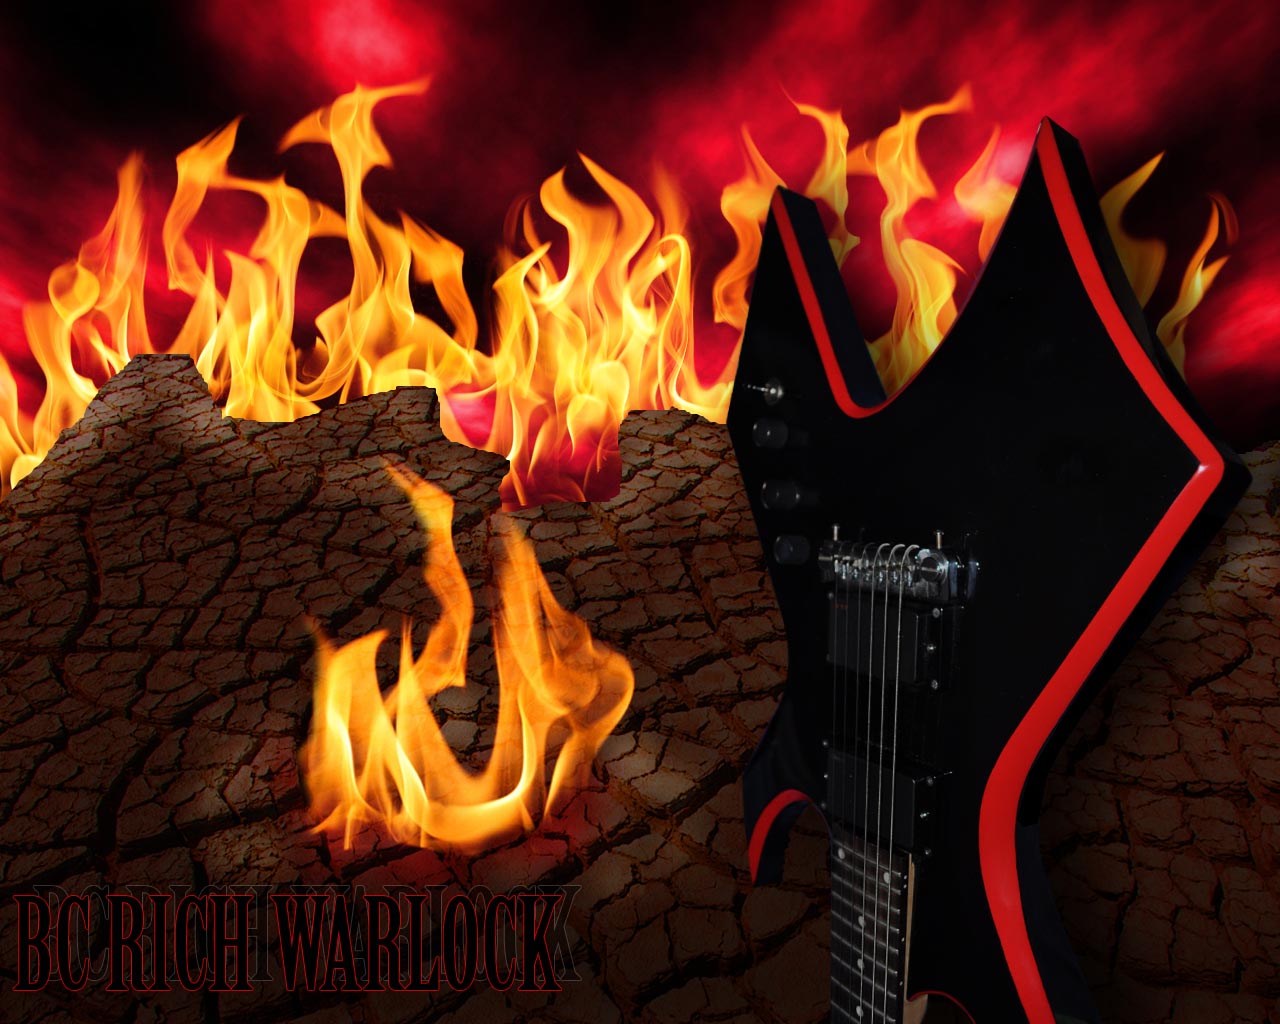 BC Rich Warlock by maximodeviant